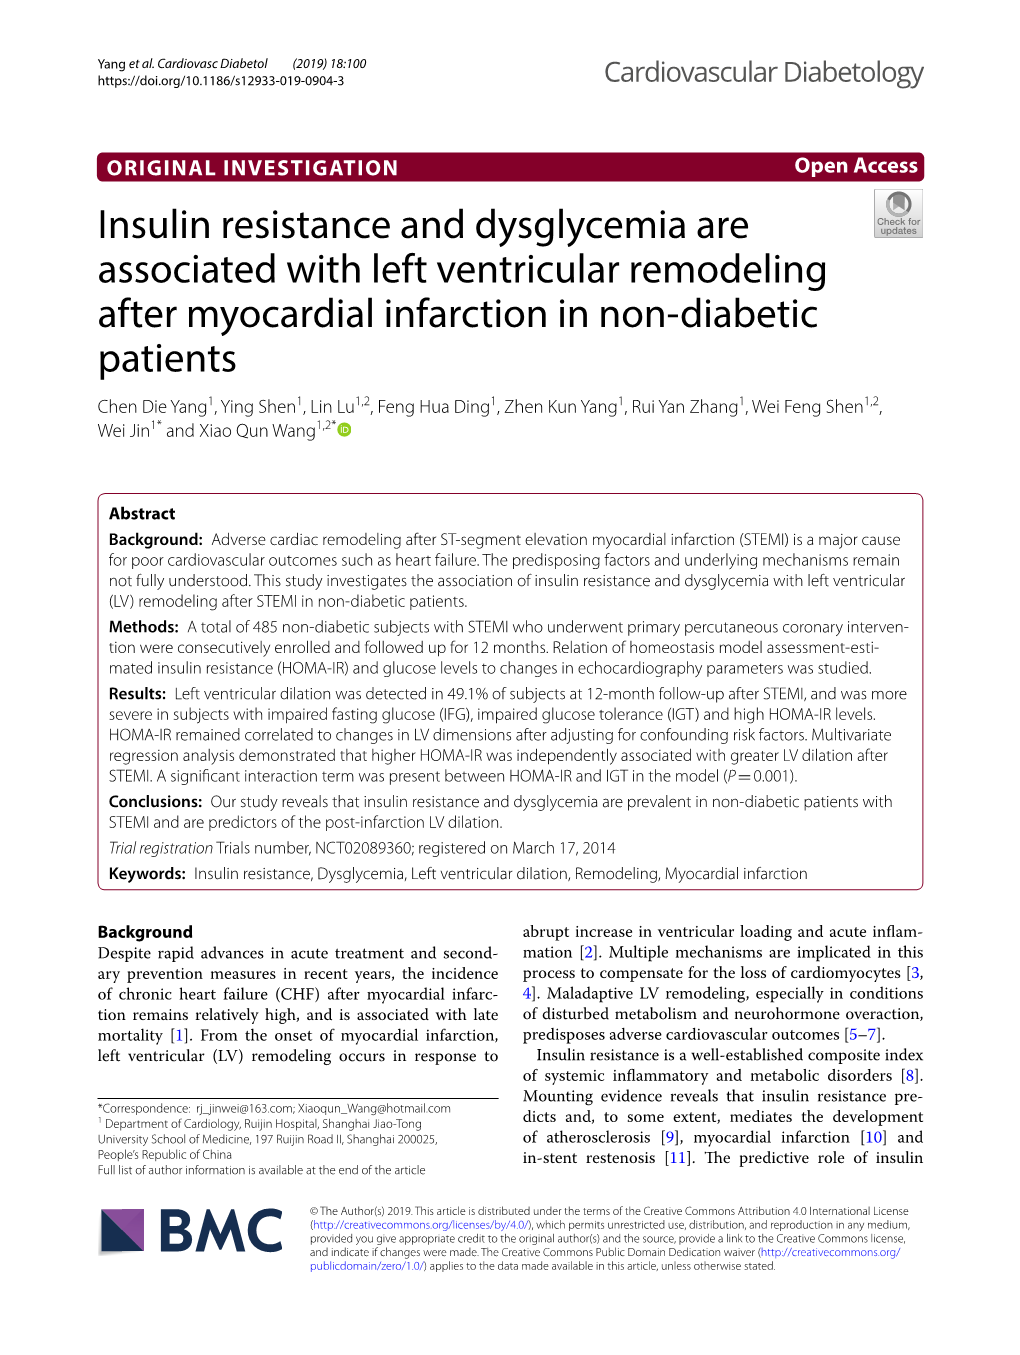 Insulin Resistance and Dysglycemia Are Associated with Left Ventricular